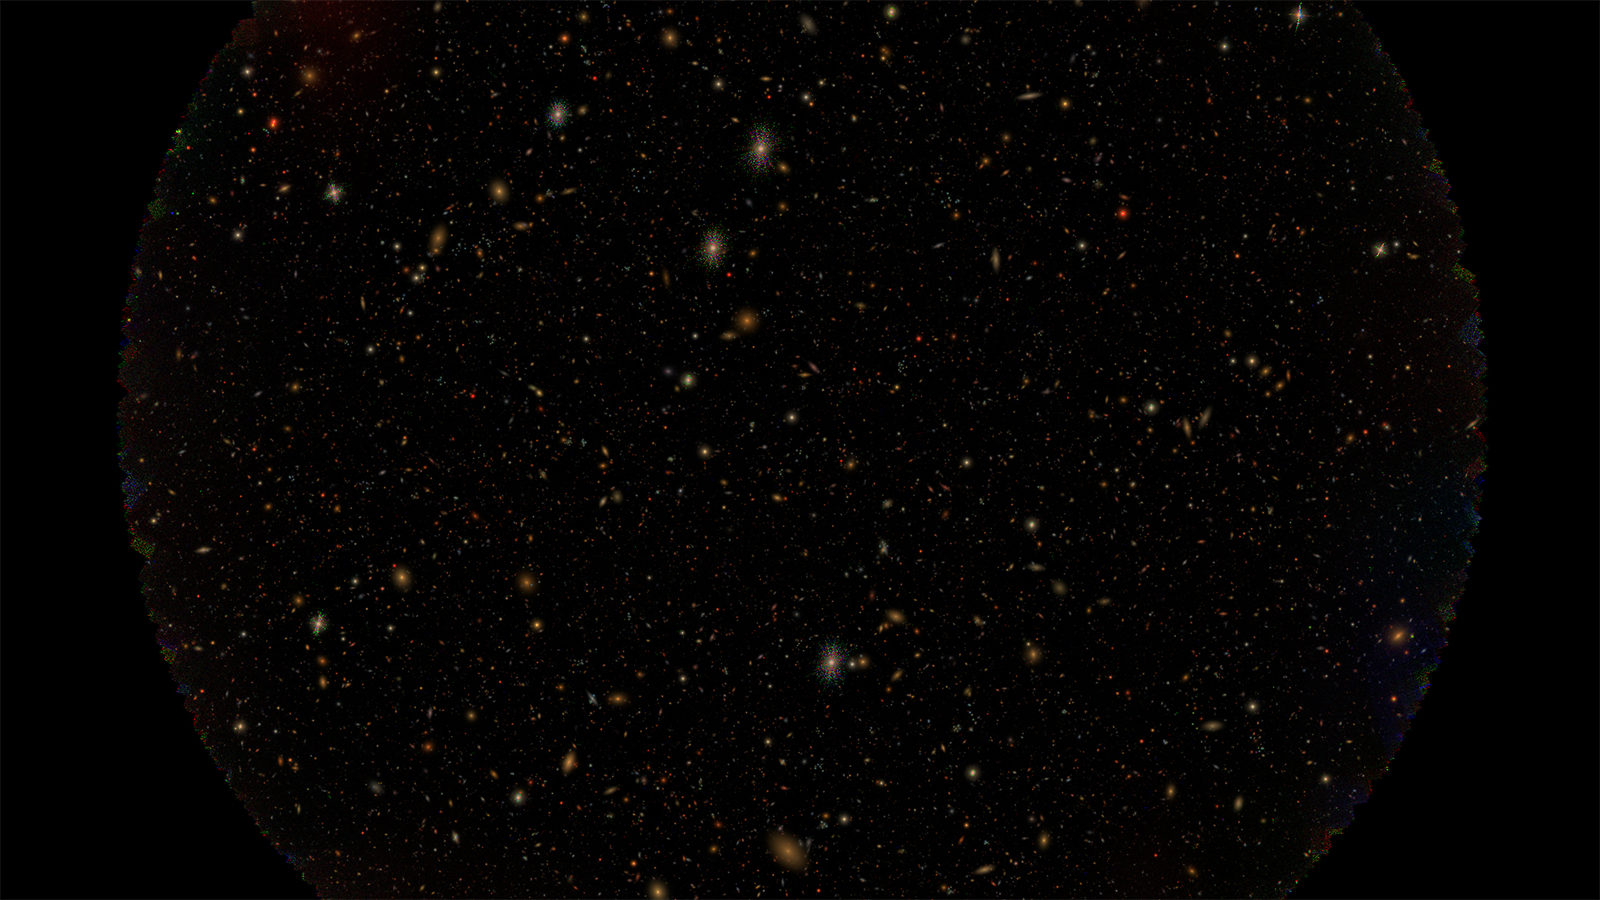 A simulation of stars against a black background